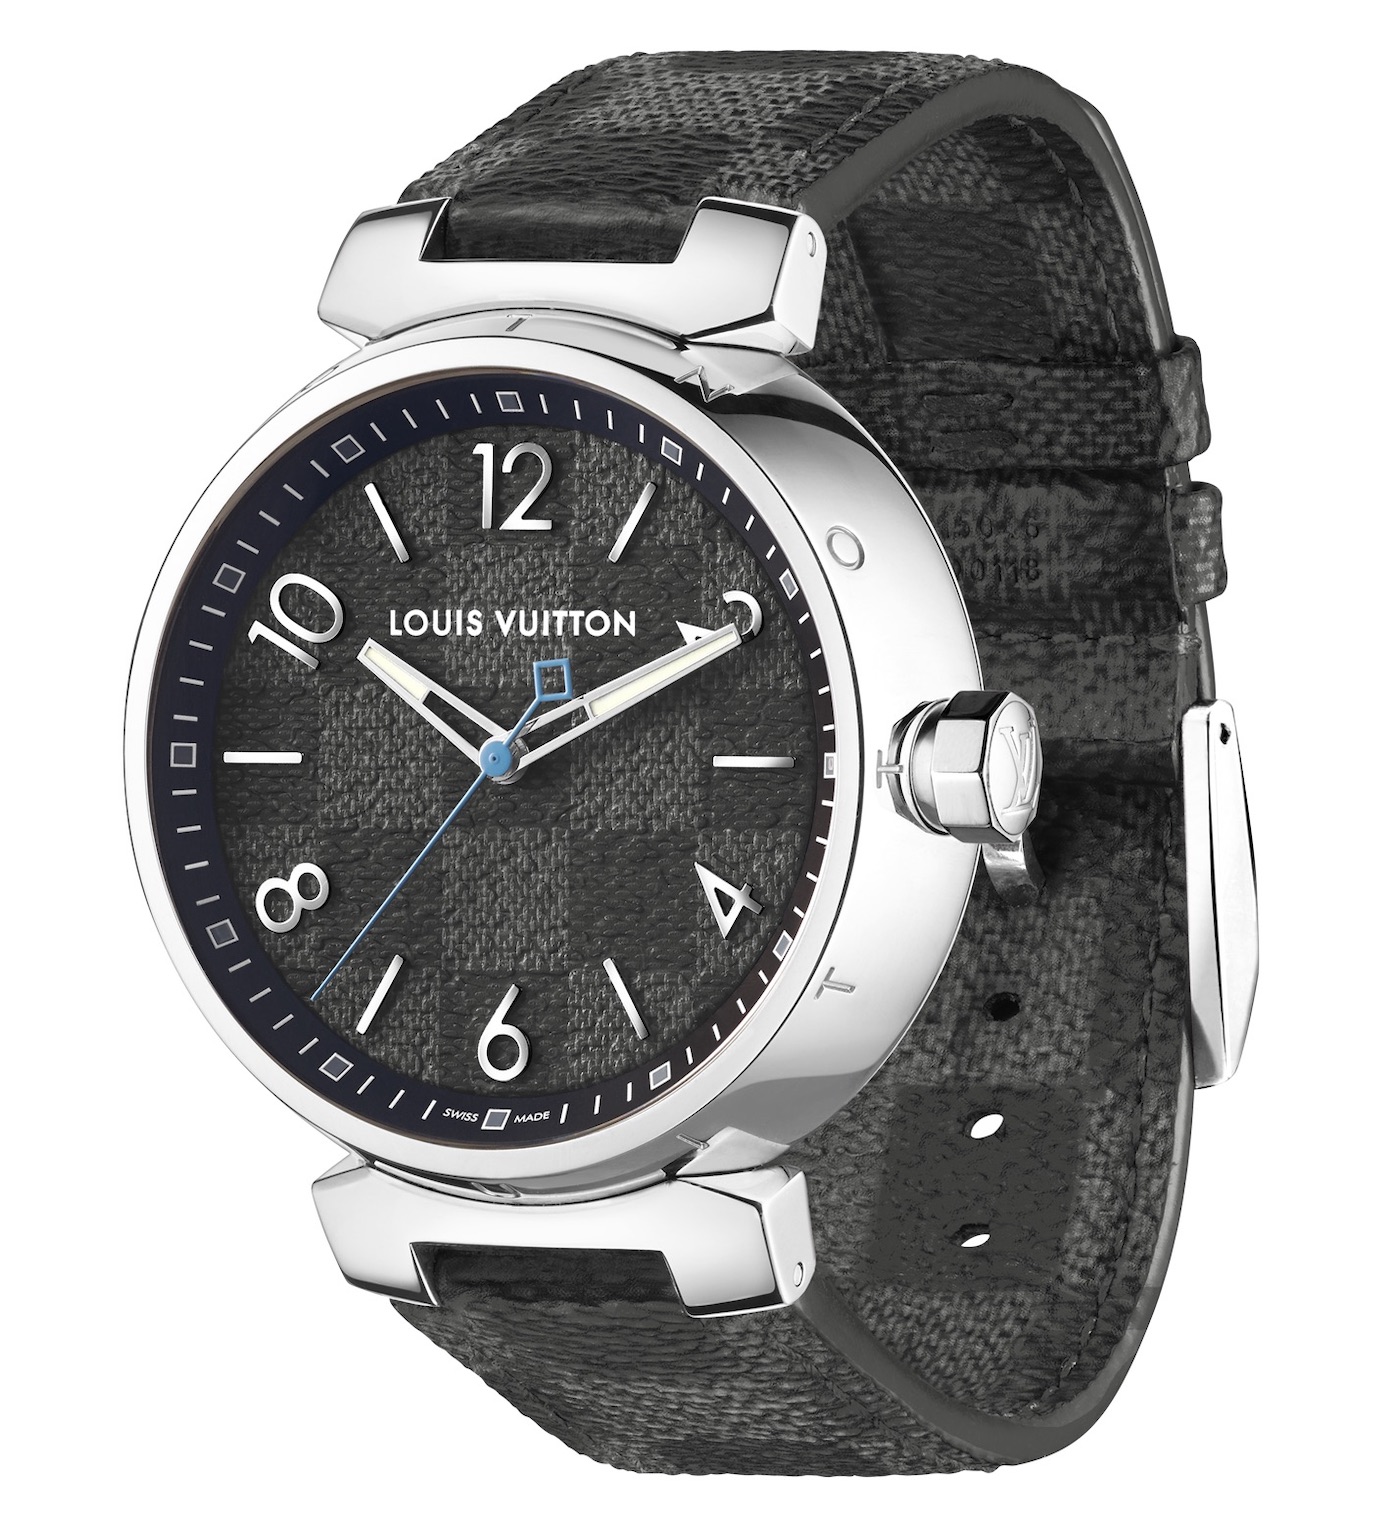 Pre-Basel 2015: Introducing The Louis Vuitton Tambour éVolution In Black  (With Specs And Prices)